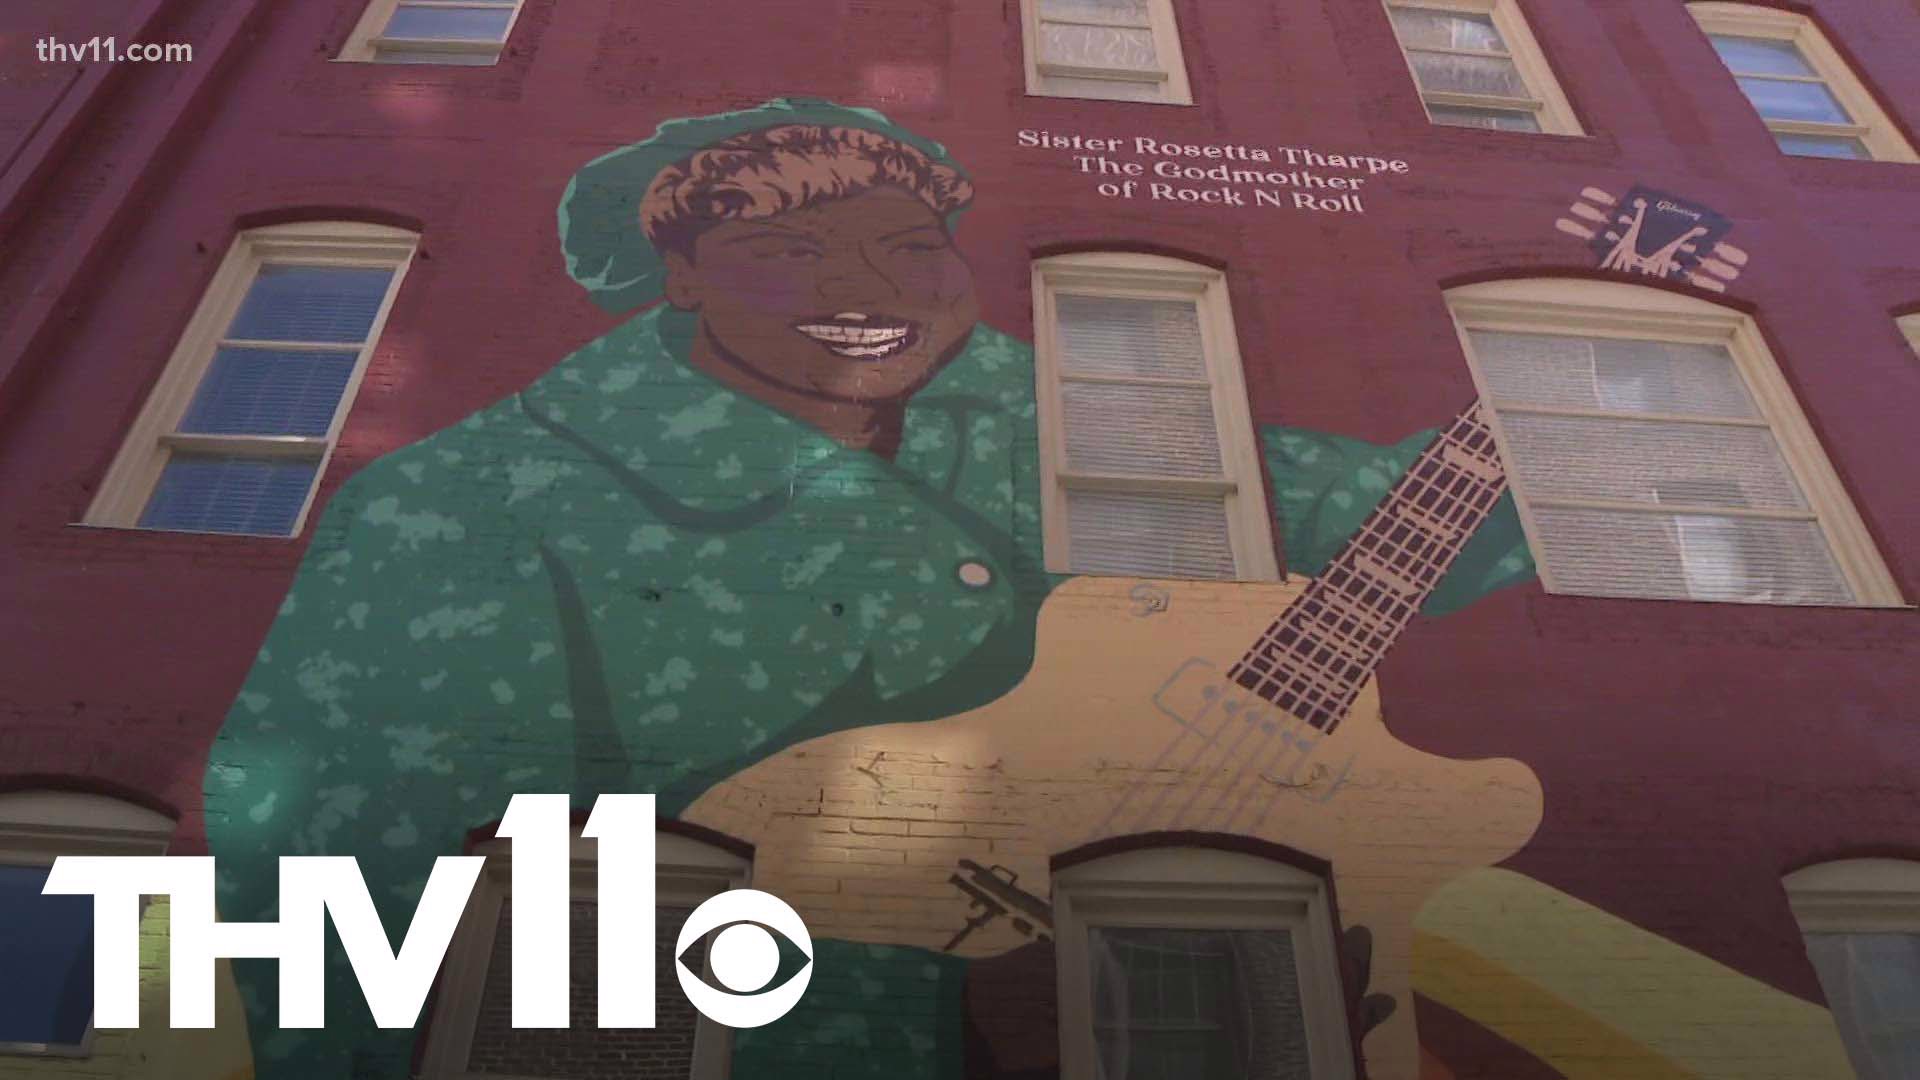 A new mural unveiled in downtown Little Rock honored Sister Rosetta Tharpe, the legendary Arkansas woman known as the "Godmother of Rock and Roll."